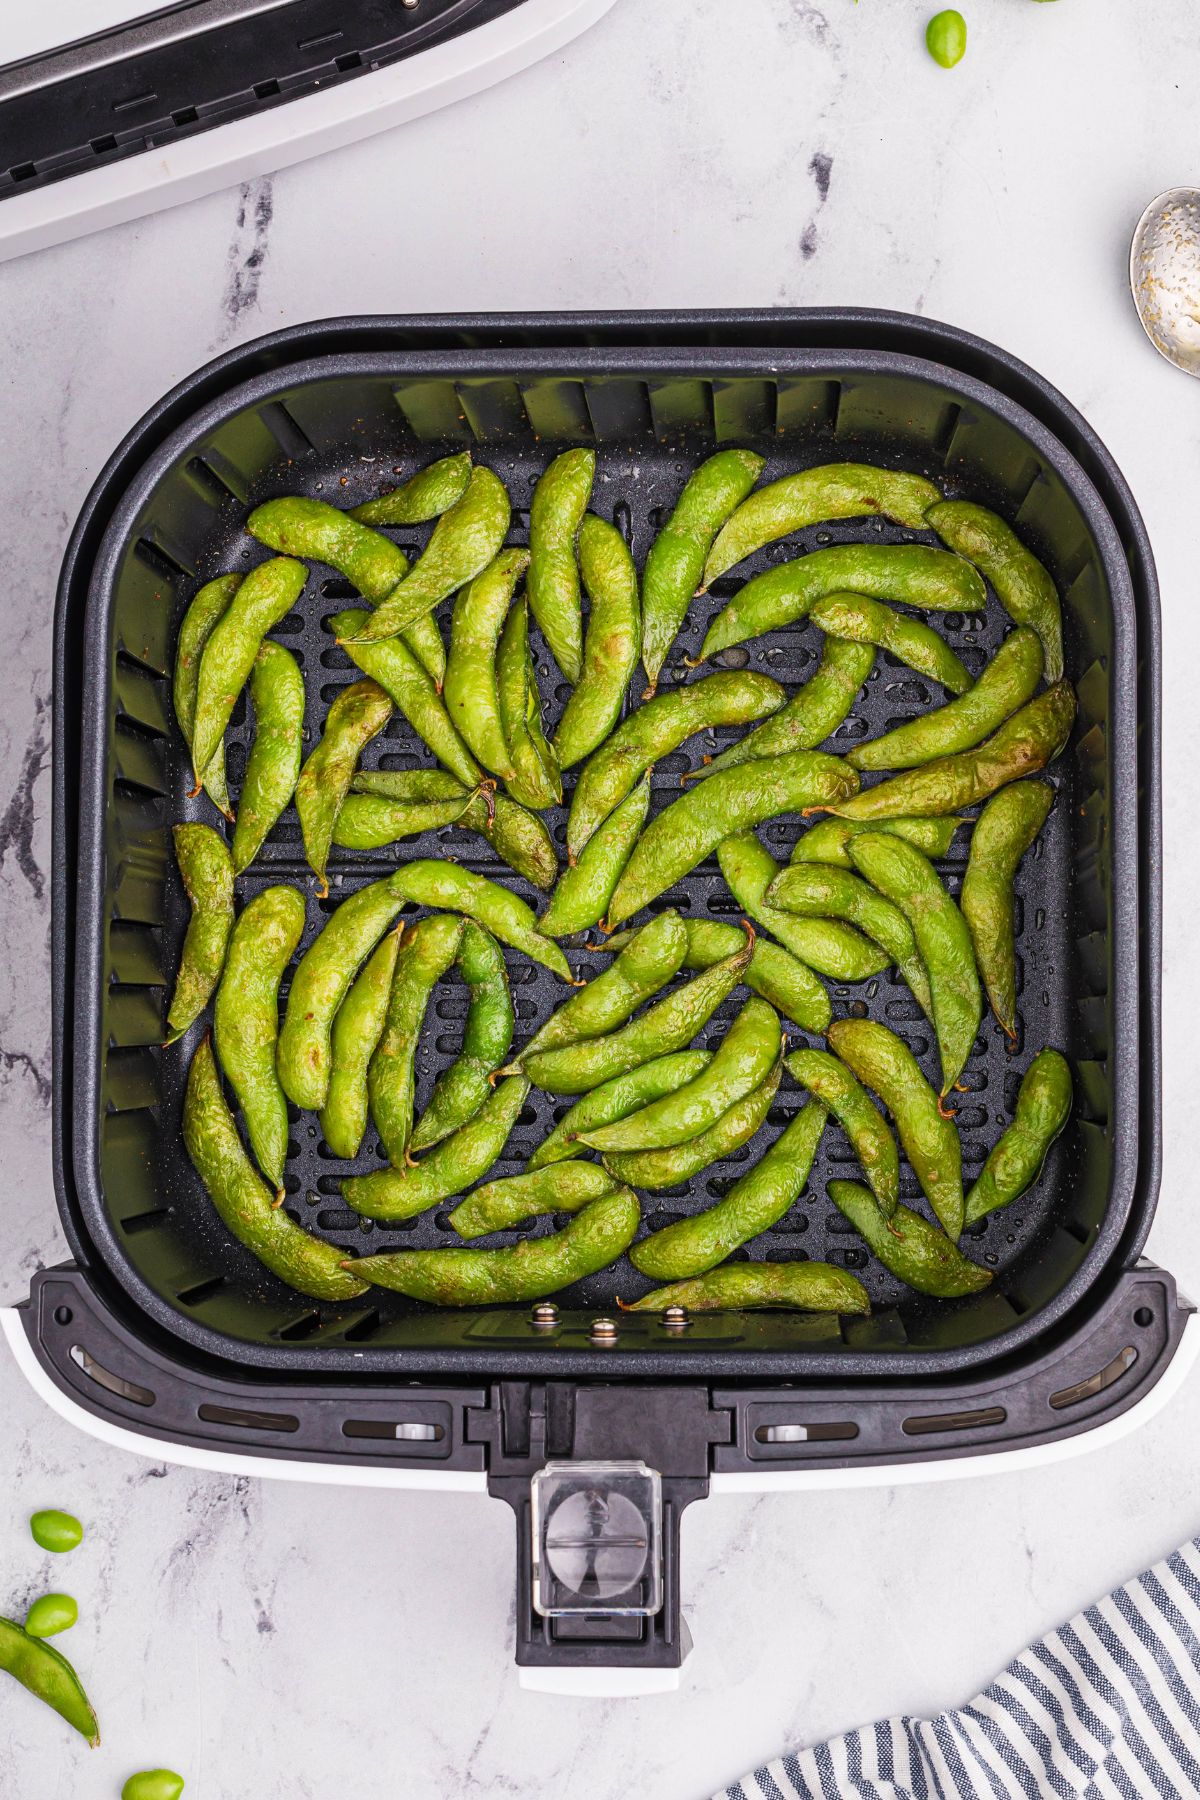 Air fried edamame pods in the air fryer basket